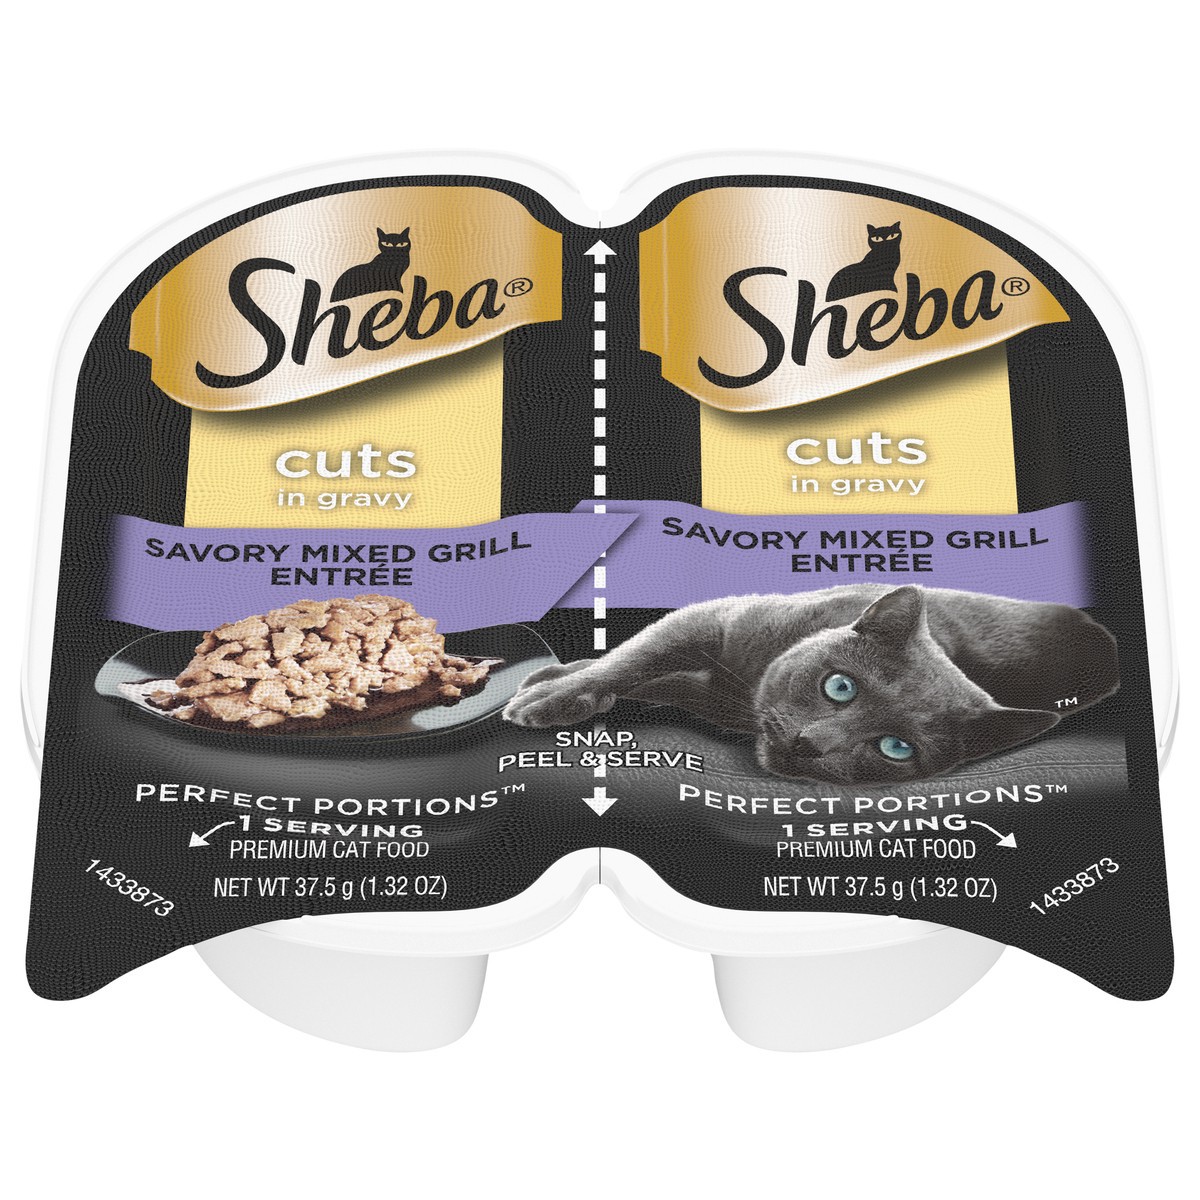 slide 1 of 3, Sheba Perfect Portions Cuts in Gravy Premium Savory Mixed Grill Entree Cat Food 2 - 1.32 oz Tray, 2 ct